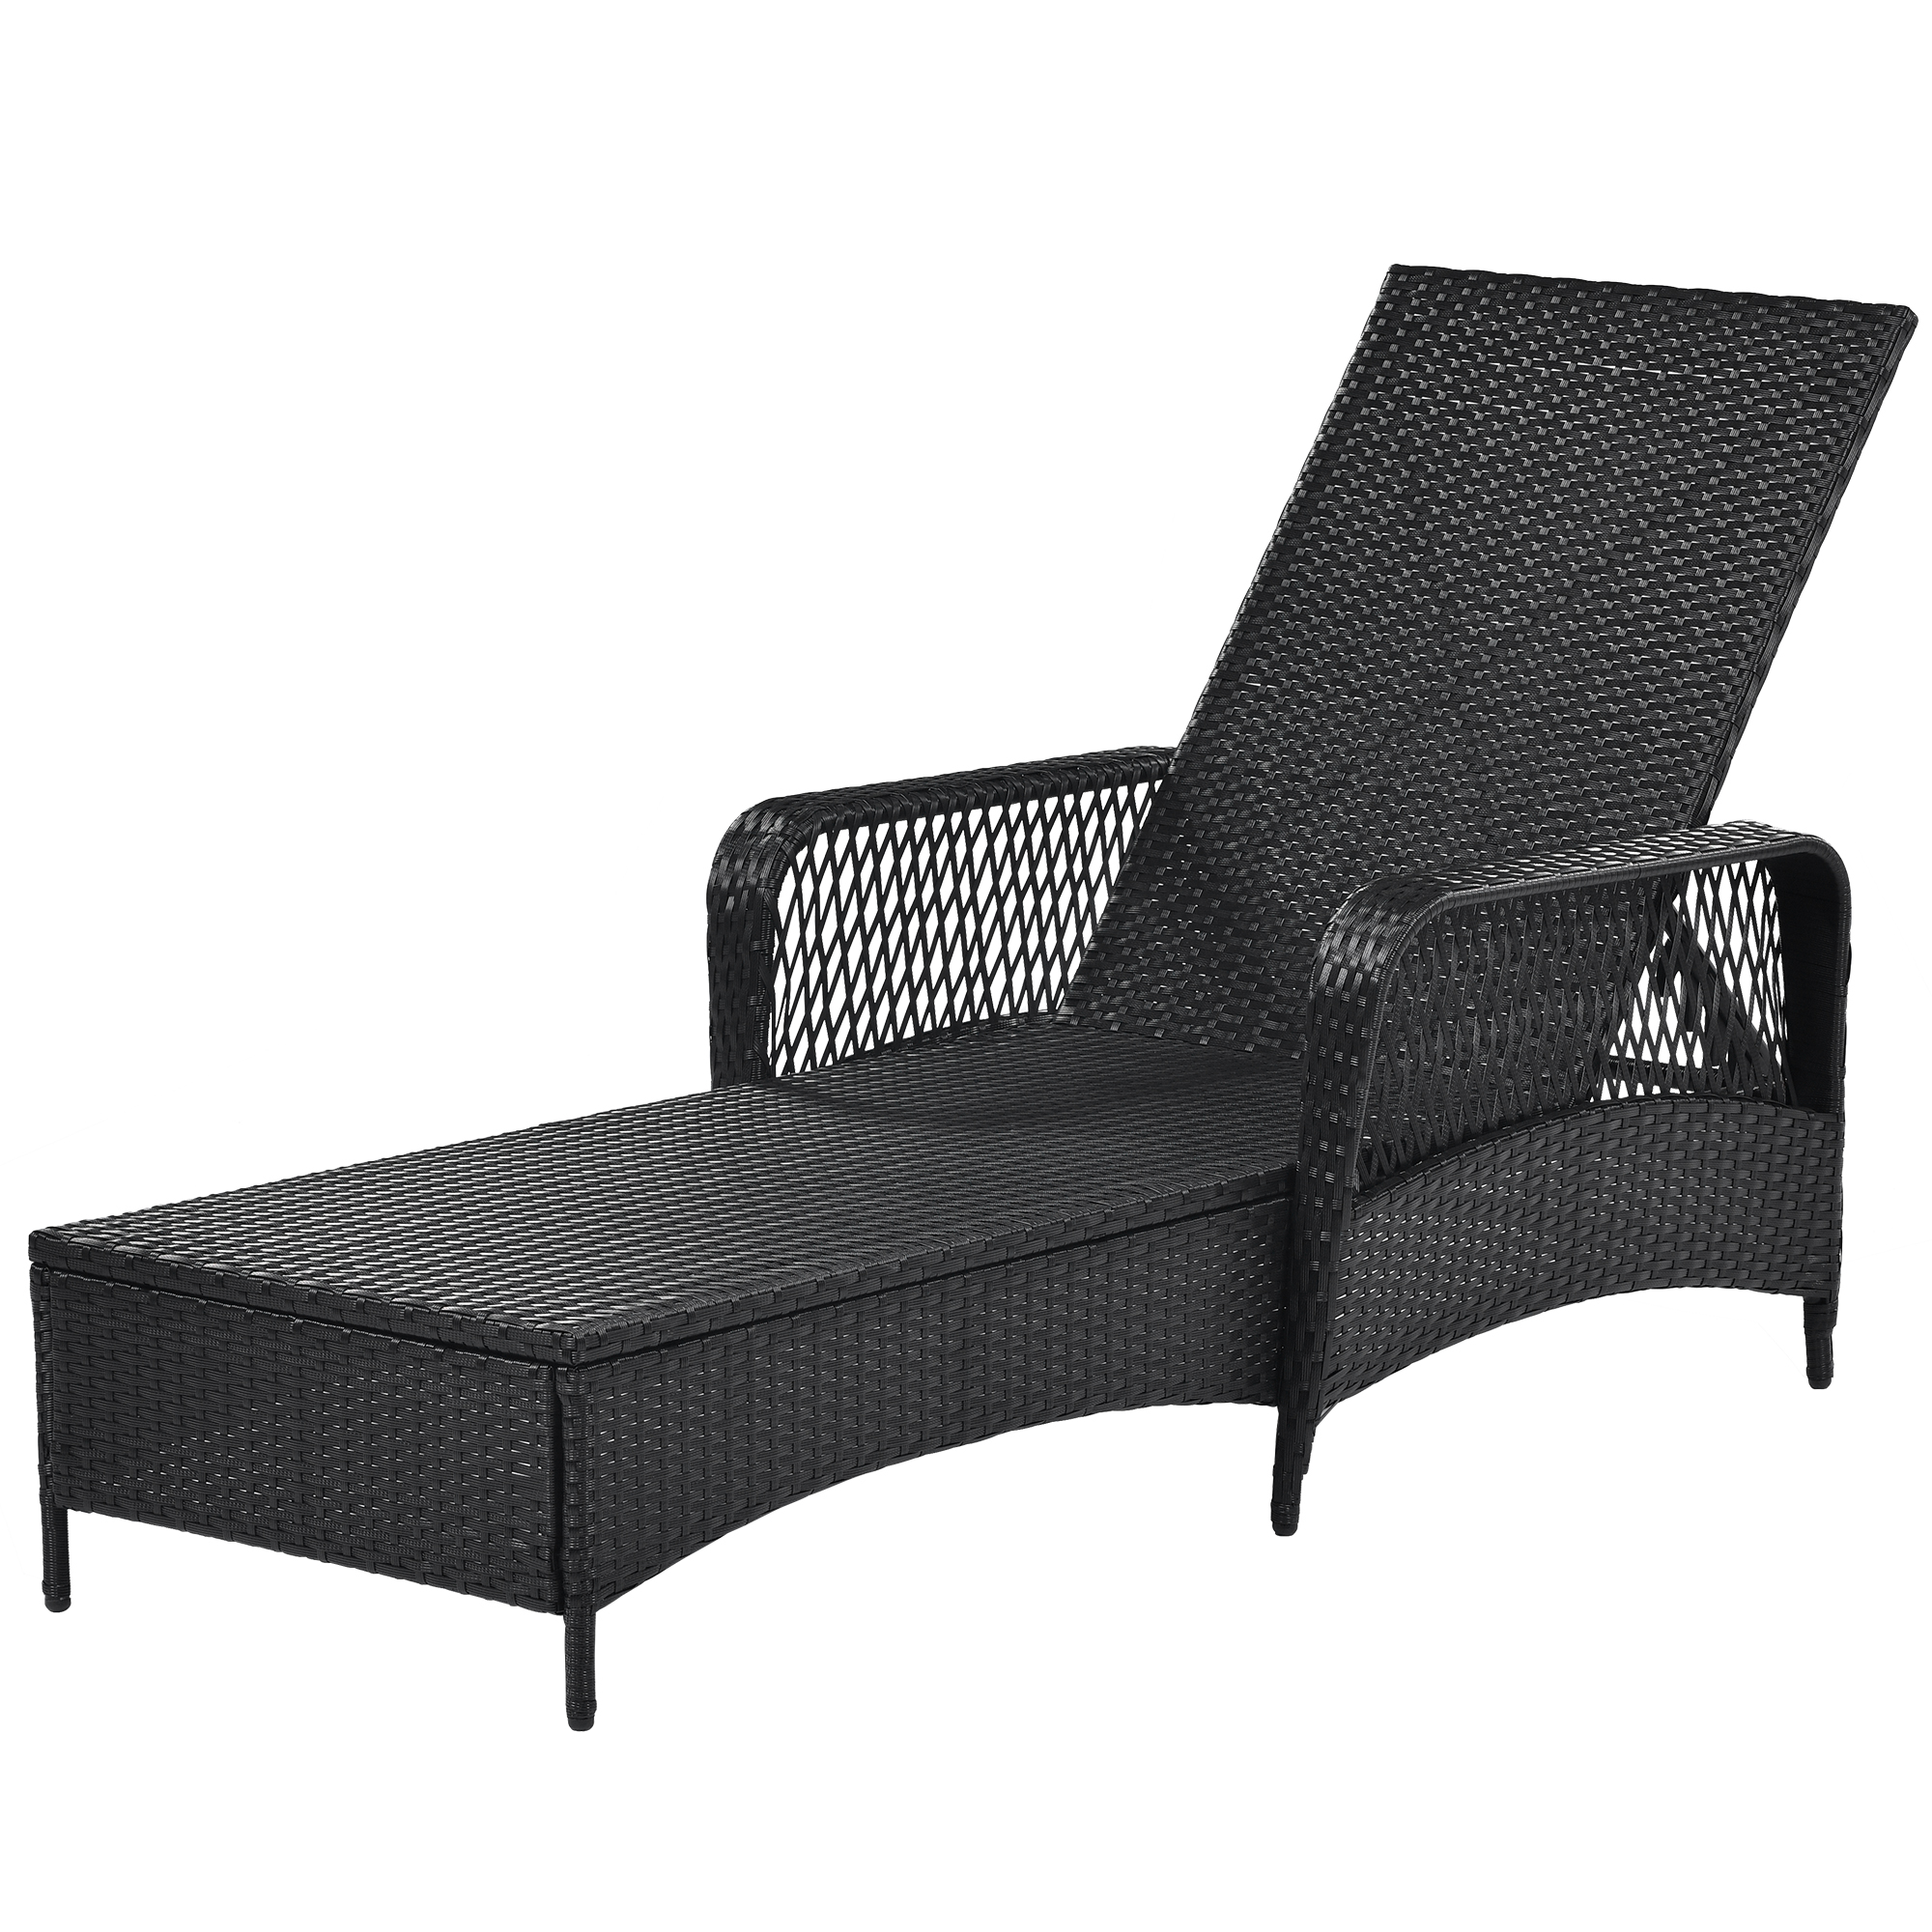 Outdoor Rattan Chaise Lounge Set, 1 Seat Patio Chaise Lounge, White Sun Lounger, Rattan Reclining Chair Furniture, Adjustable Backrest Recliners with Cushions for Garden Beach Pool - image 3 of 7